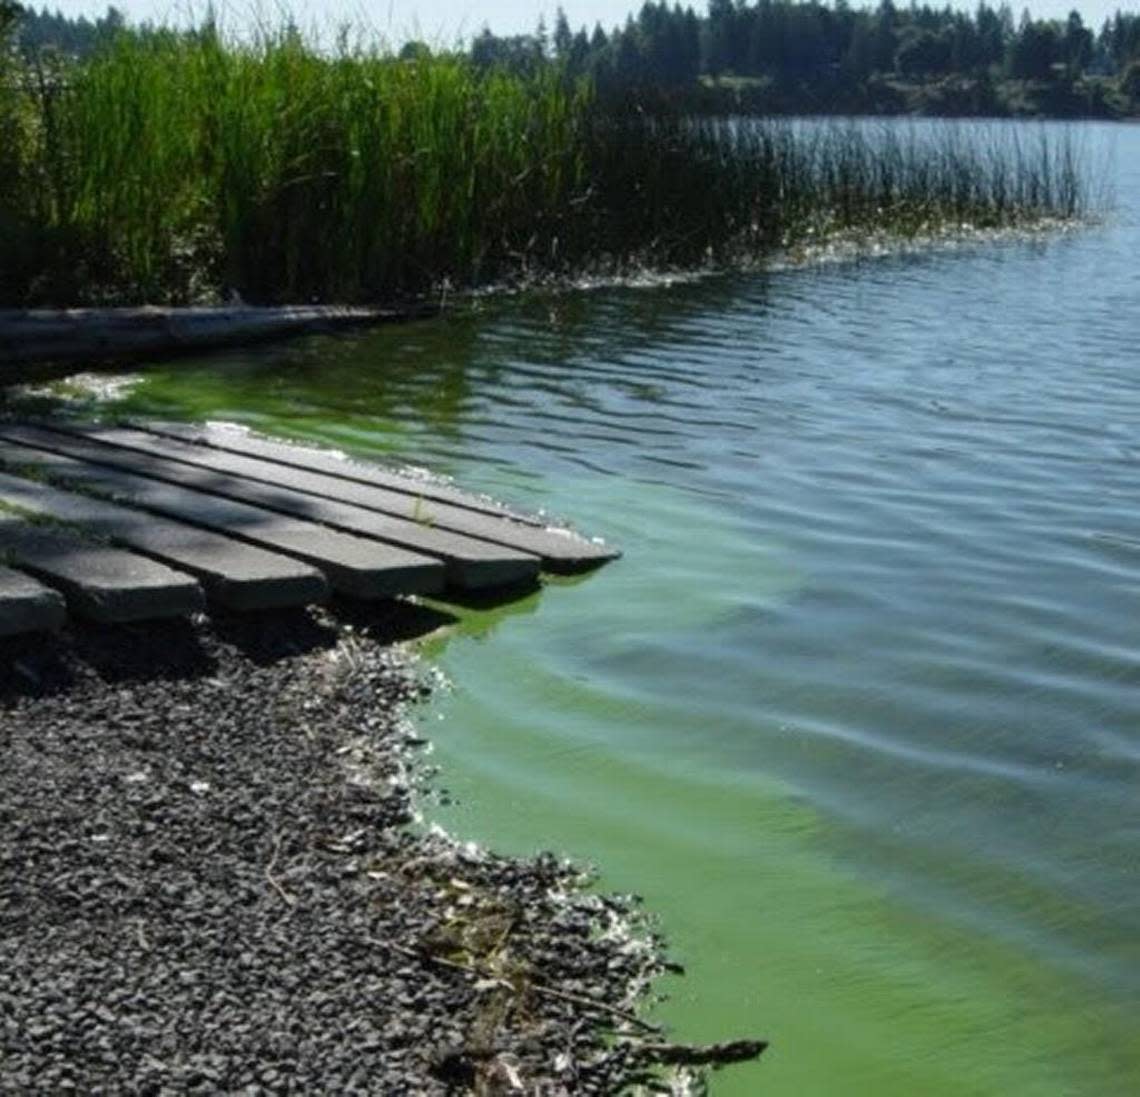 County health officials have issued a blue-green toxic algae advisory for Long Lake, above.